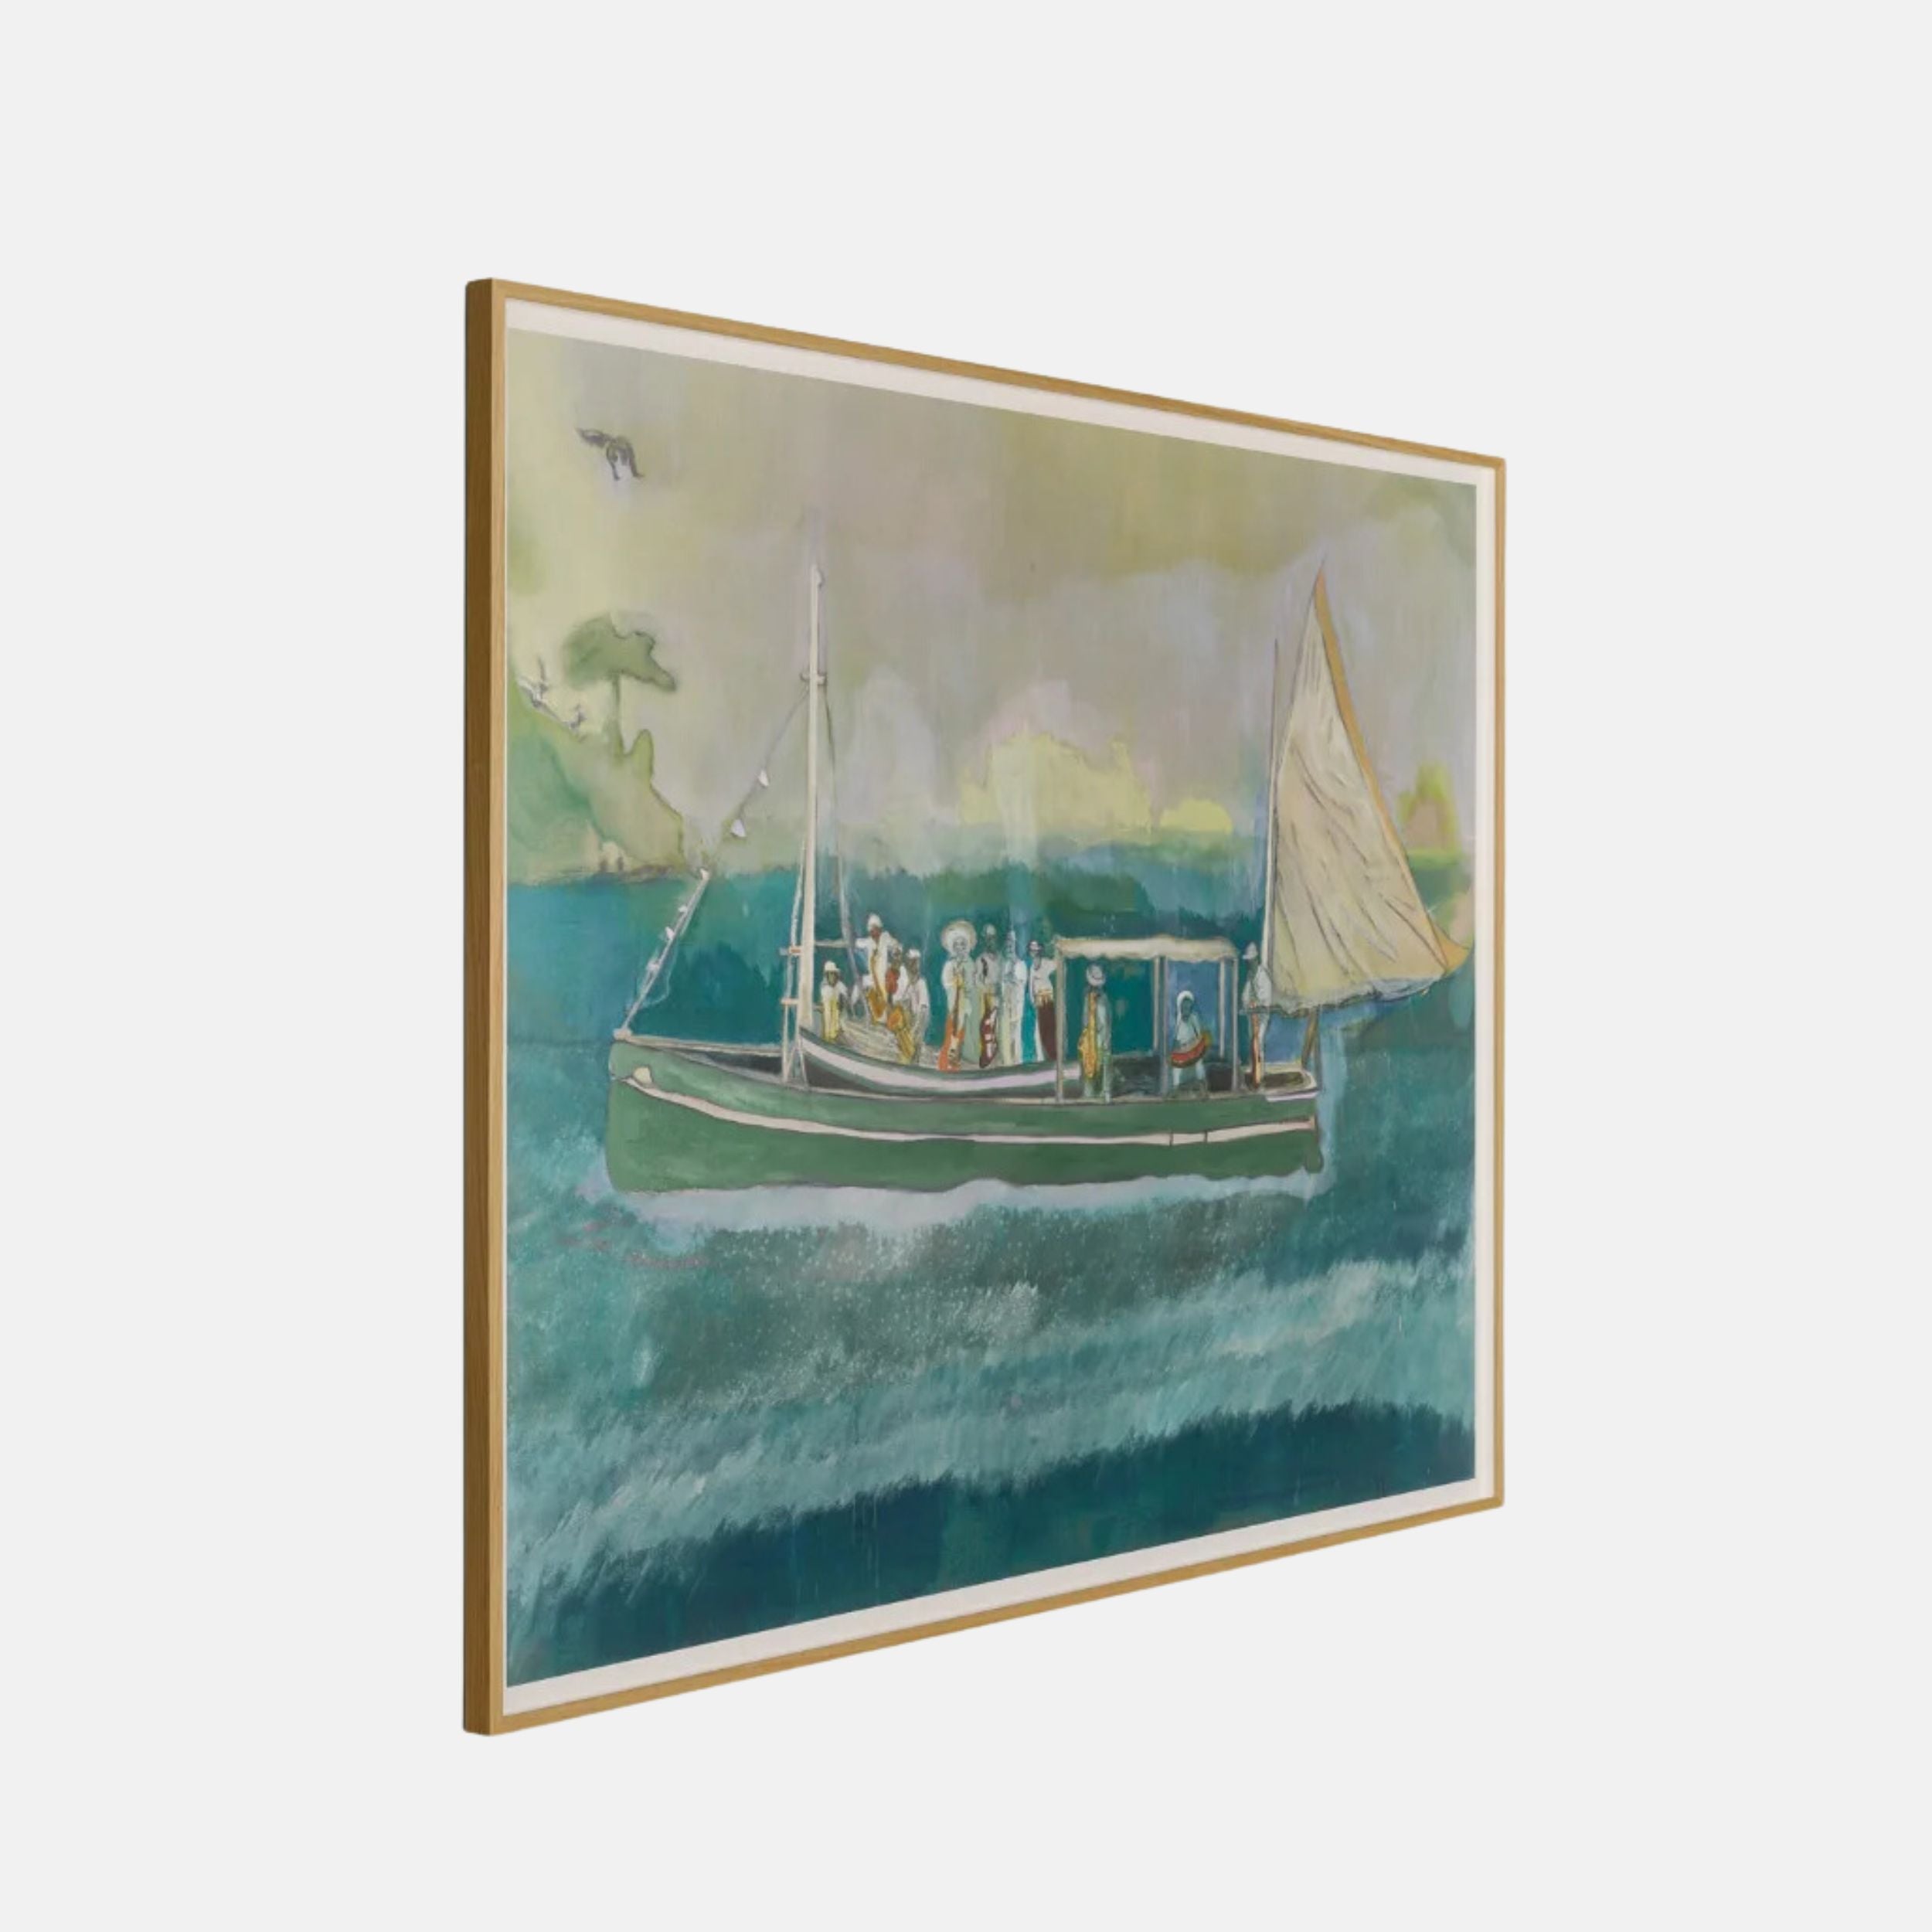 Peter Doig, D2-2B House of Music (Soca Boat), 2023 For Sale | Lougher Contemporary 